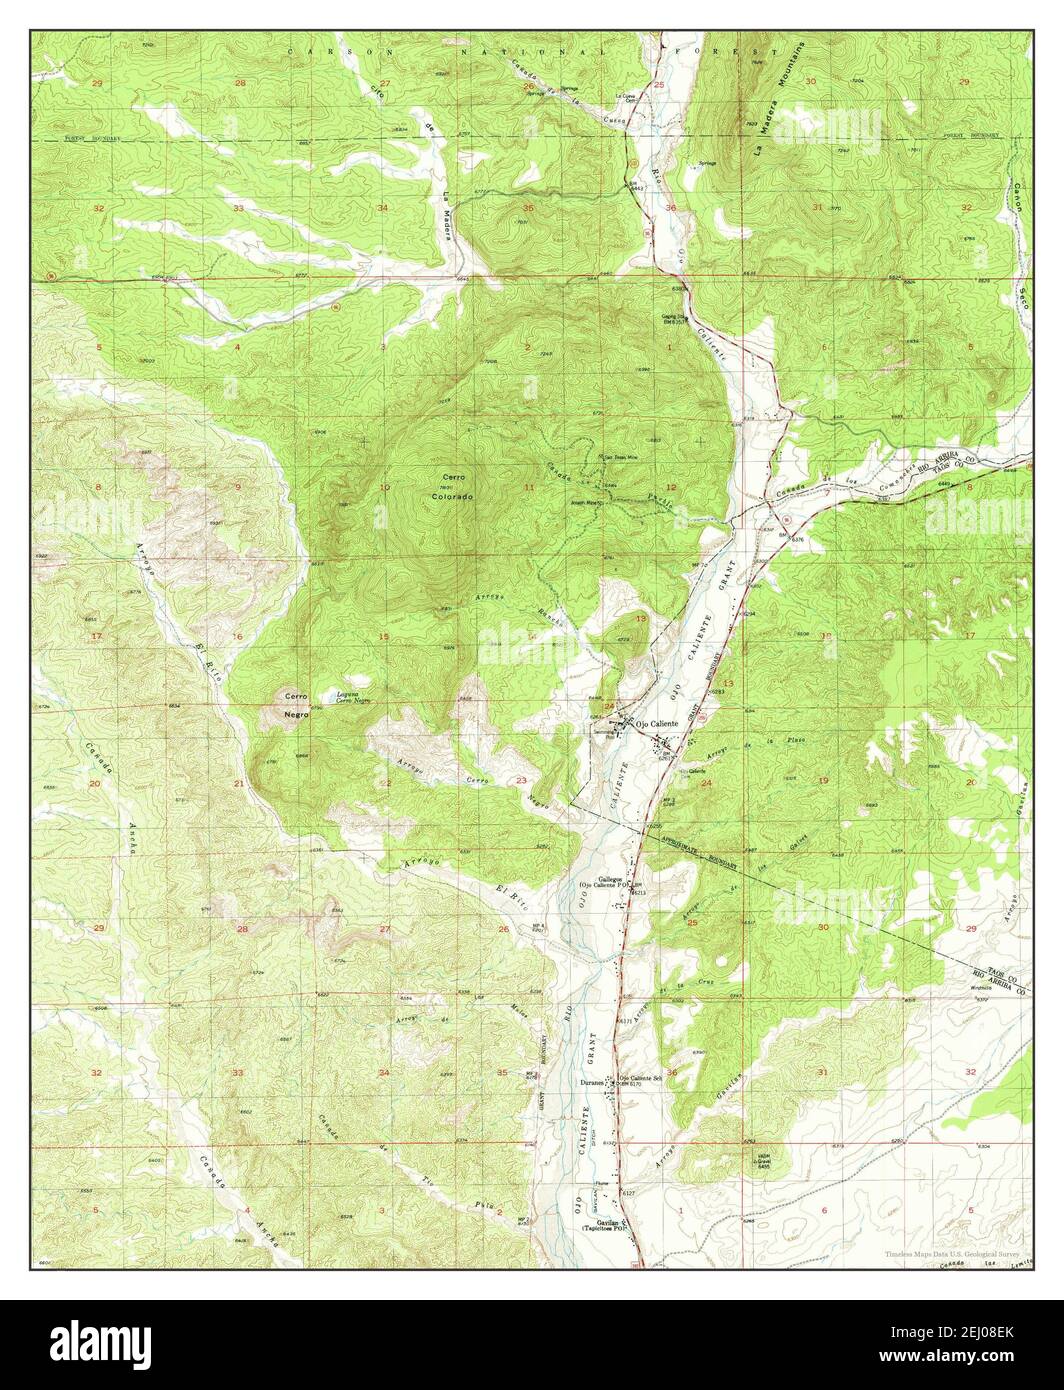 Ojo Caliente New Mexico Map 1953 124000 United States Of America By Timeless Maps Data Us Geological Survey 2EJ08EK 